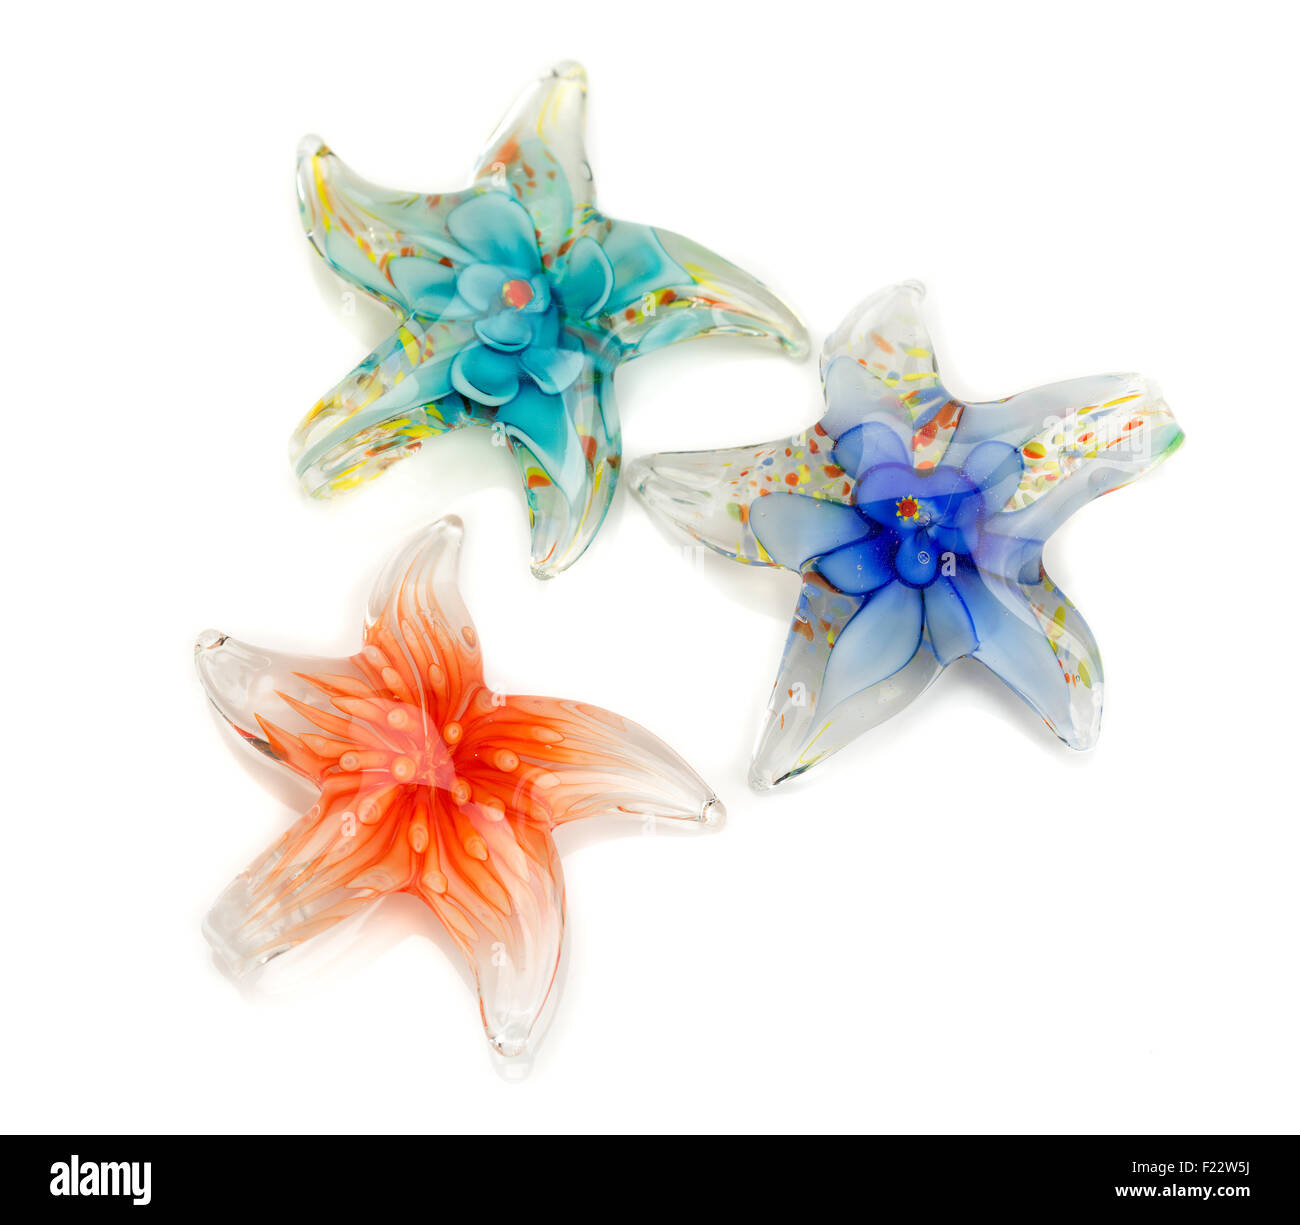 Three stars out of Murano glass isolated on white background. Stock Photo